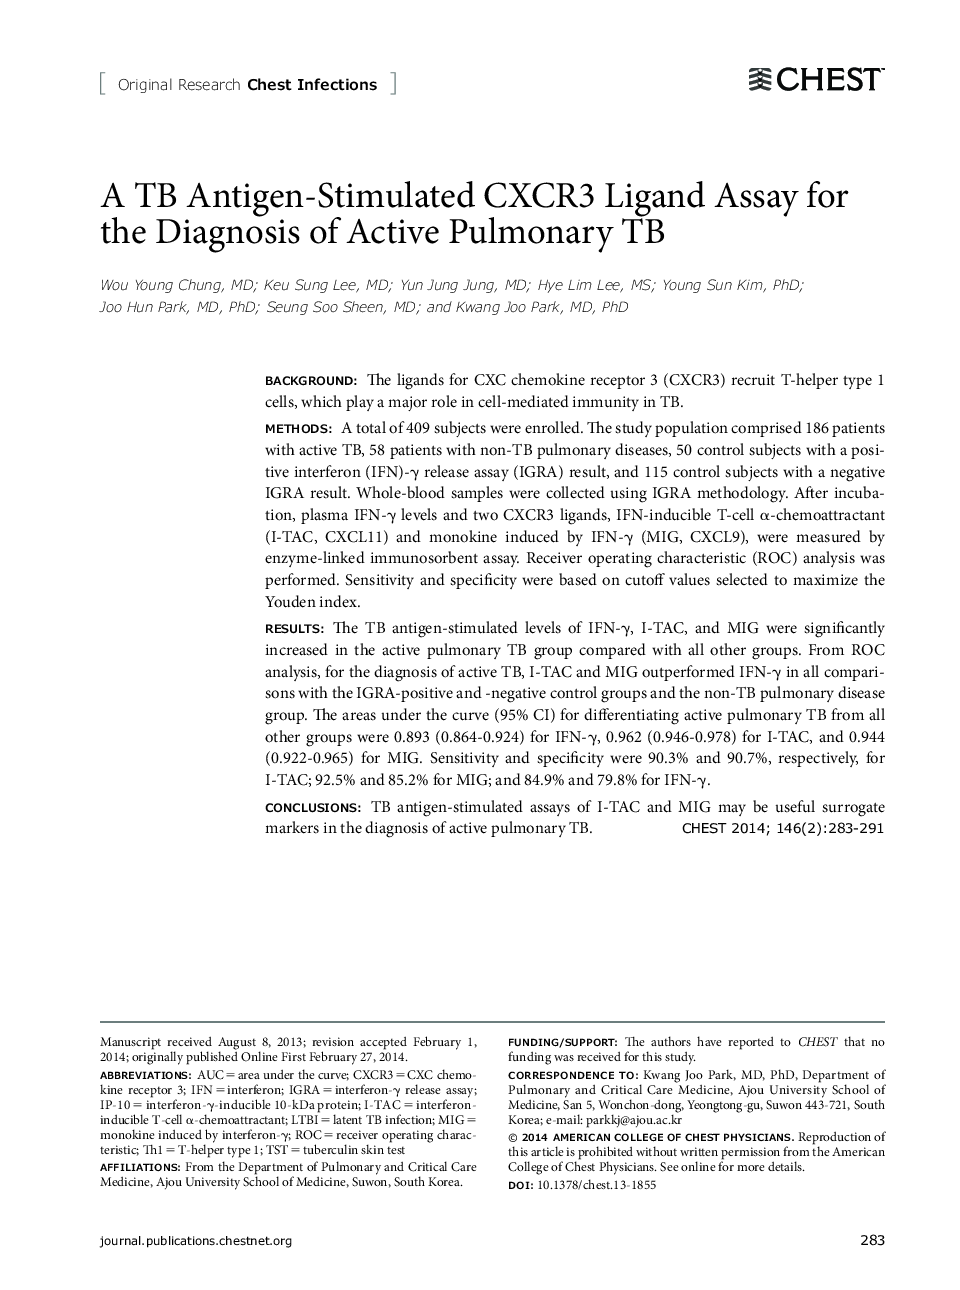 A TB Antigen-Stimulated CXCR3 Ligand Assay for the Diagnosis of Active Pulmonary TB